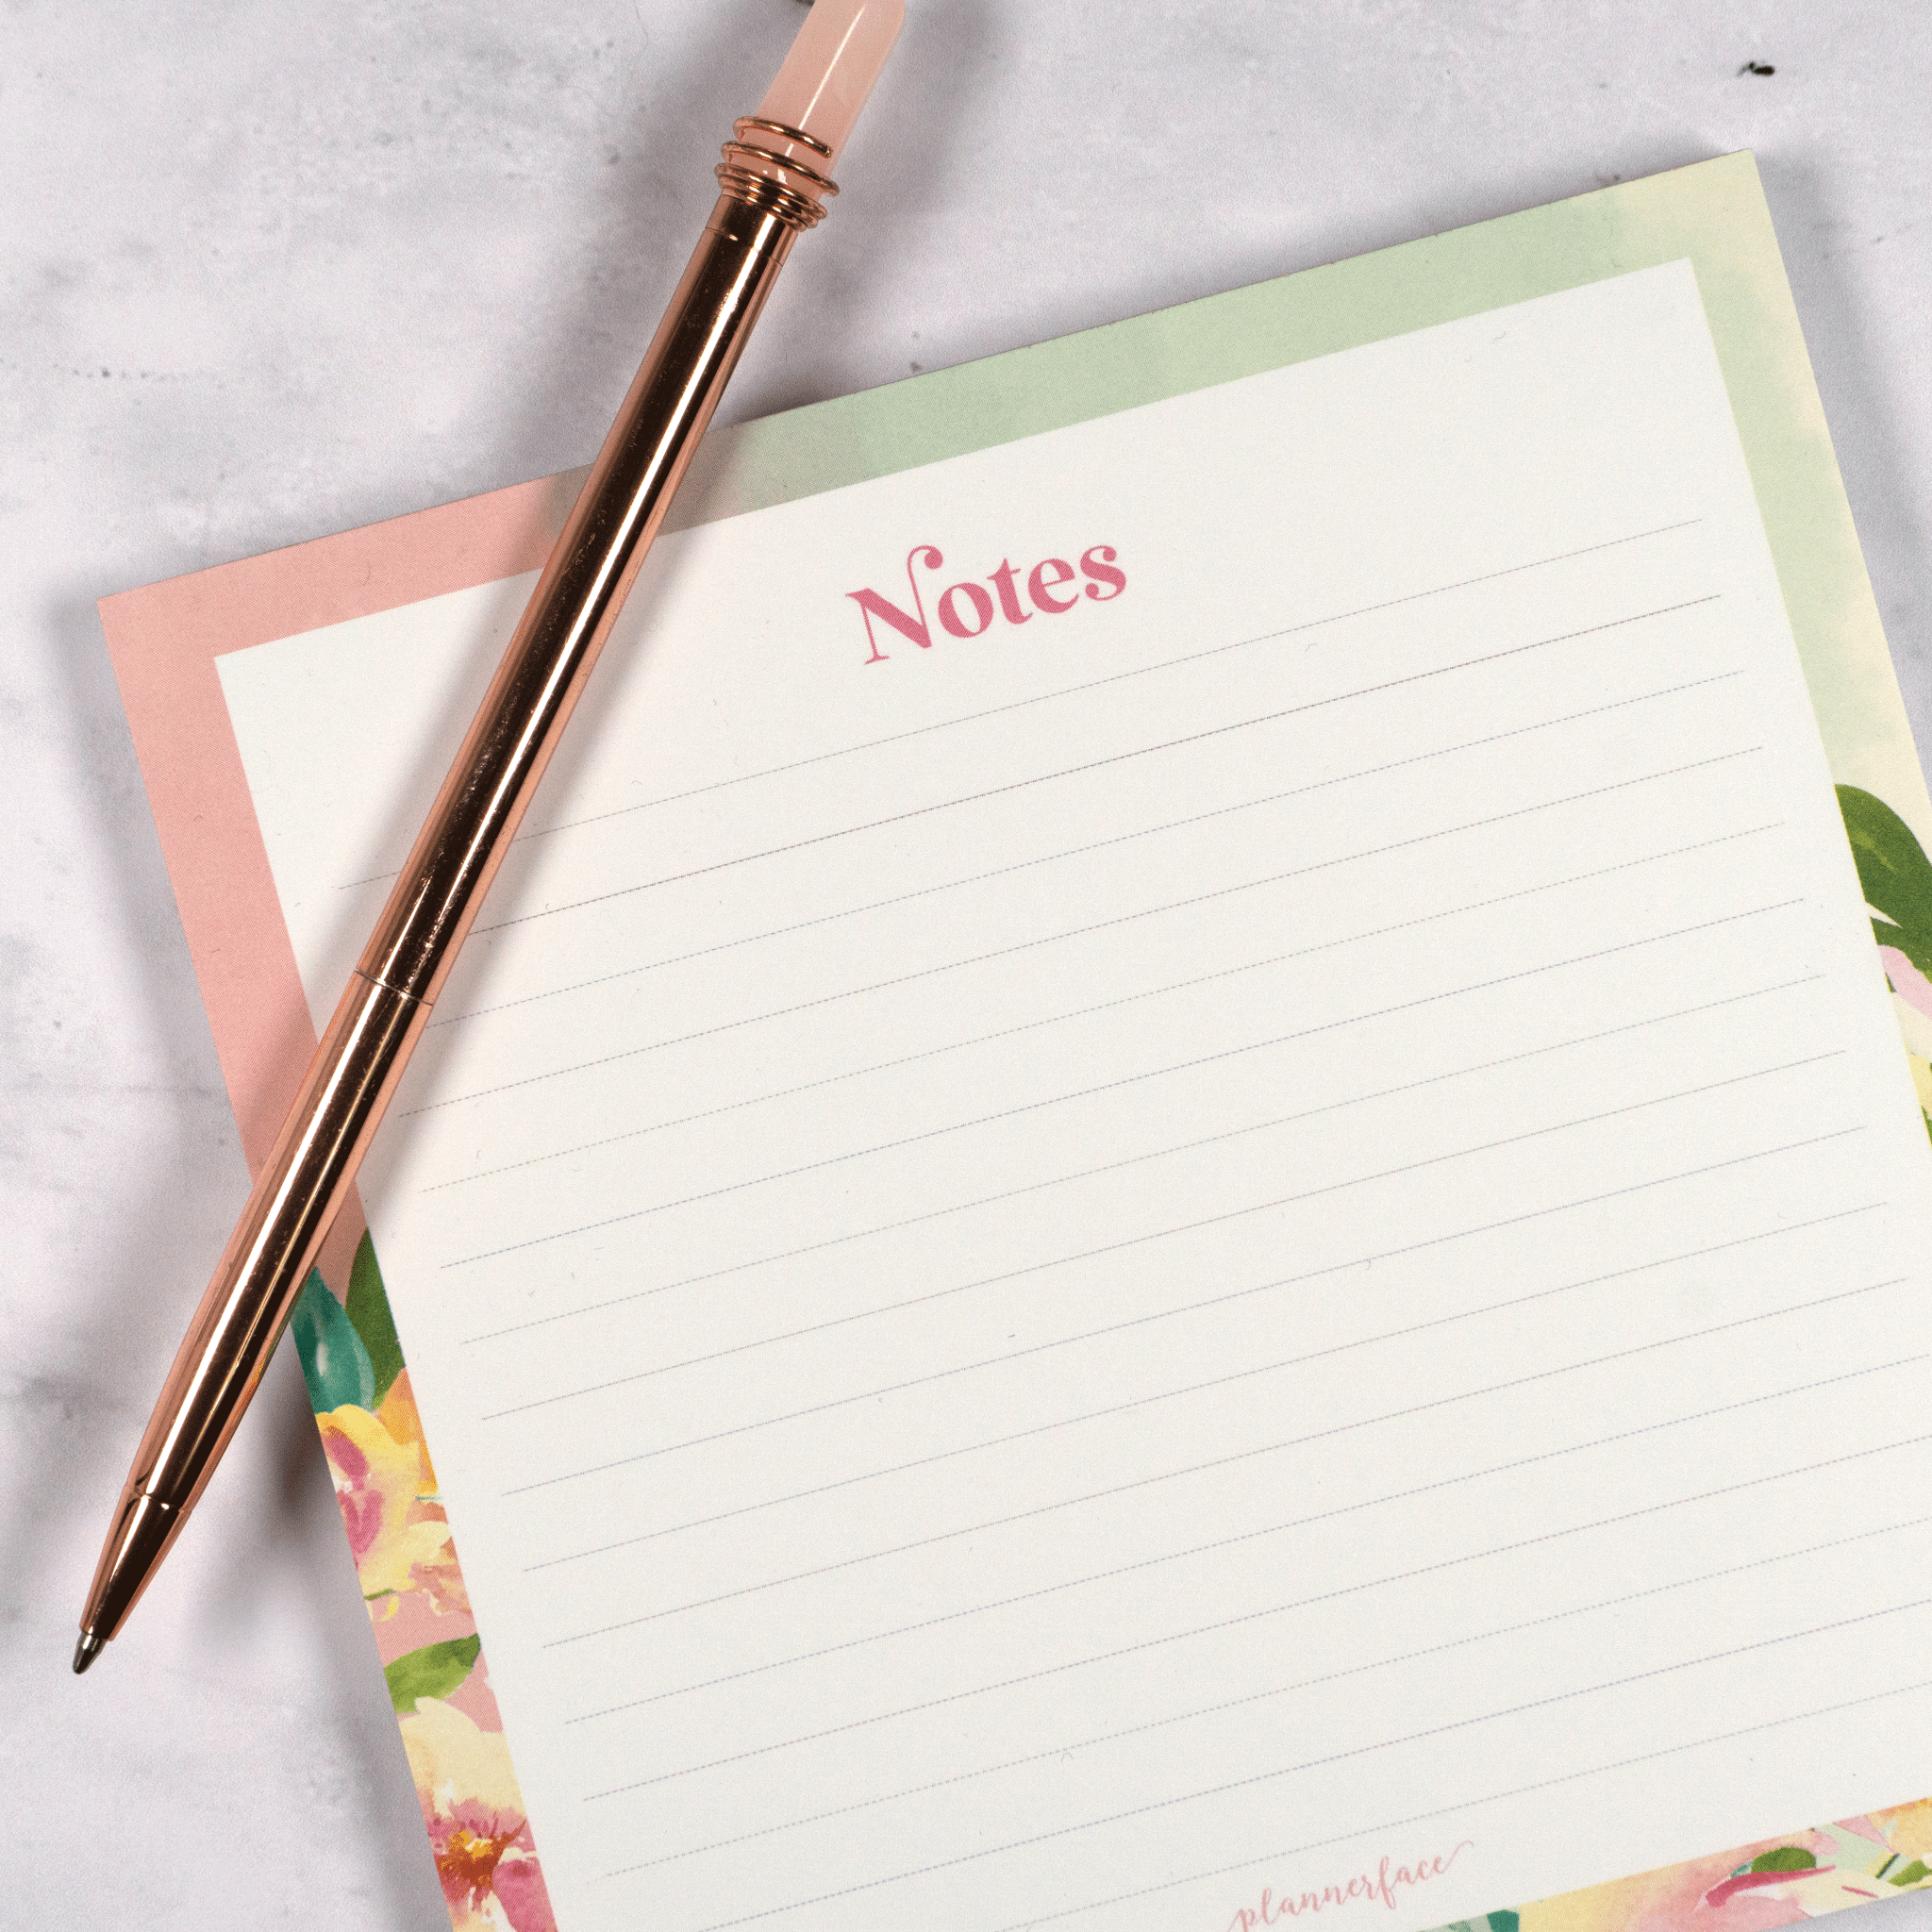 Square Floral Lined Notepad by Plannerface